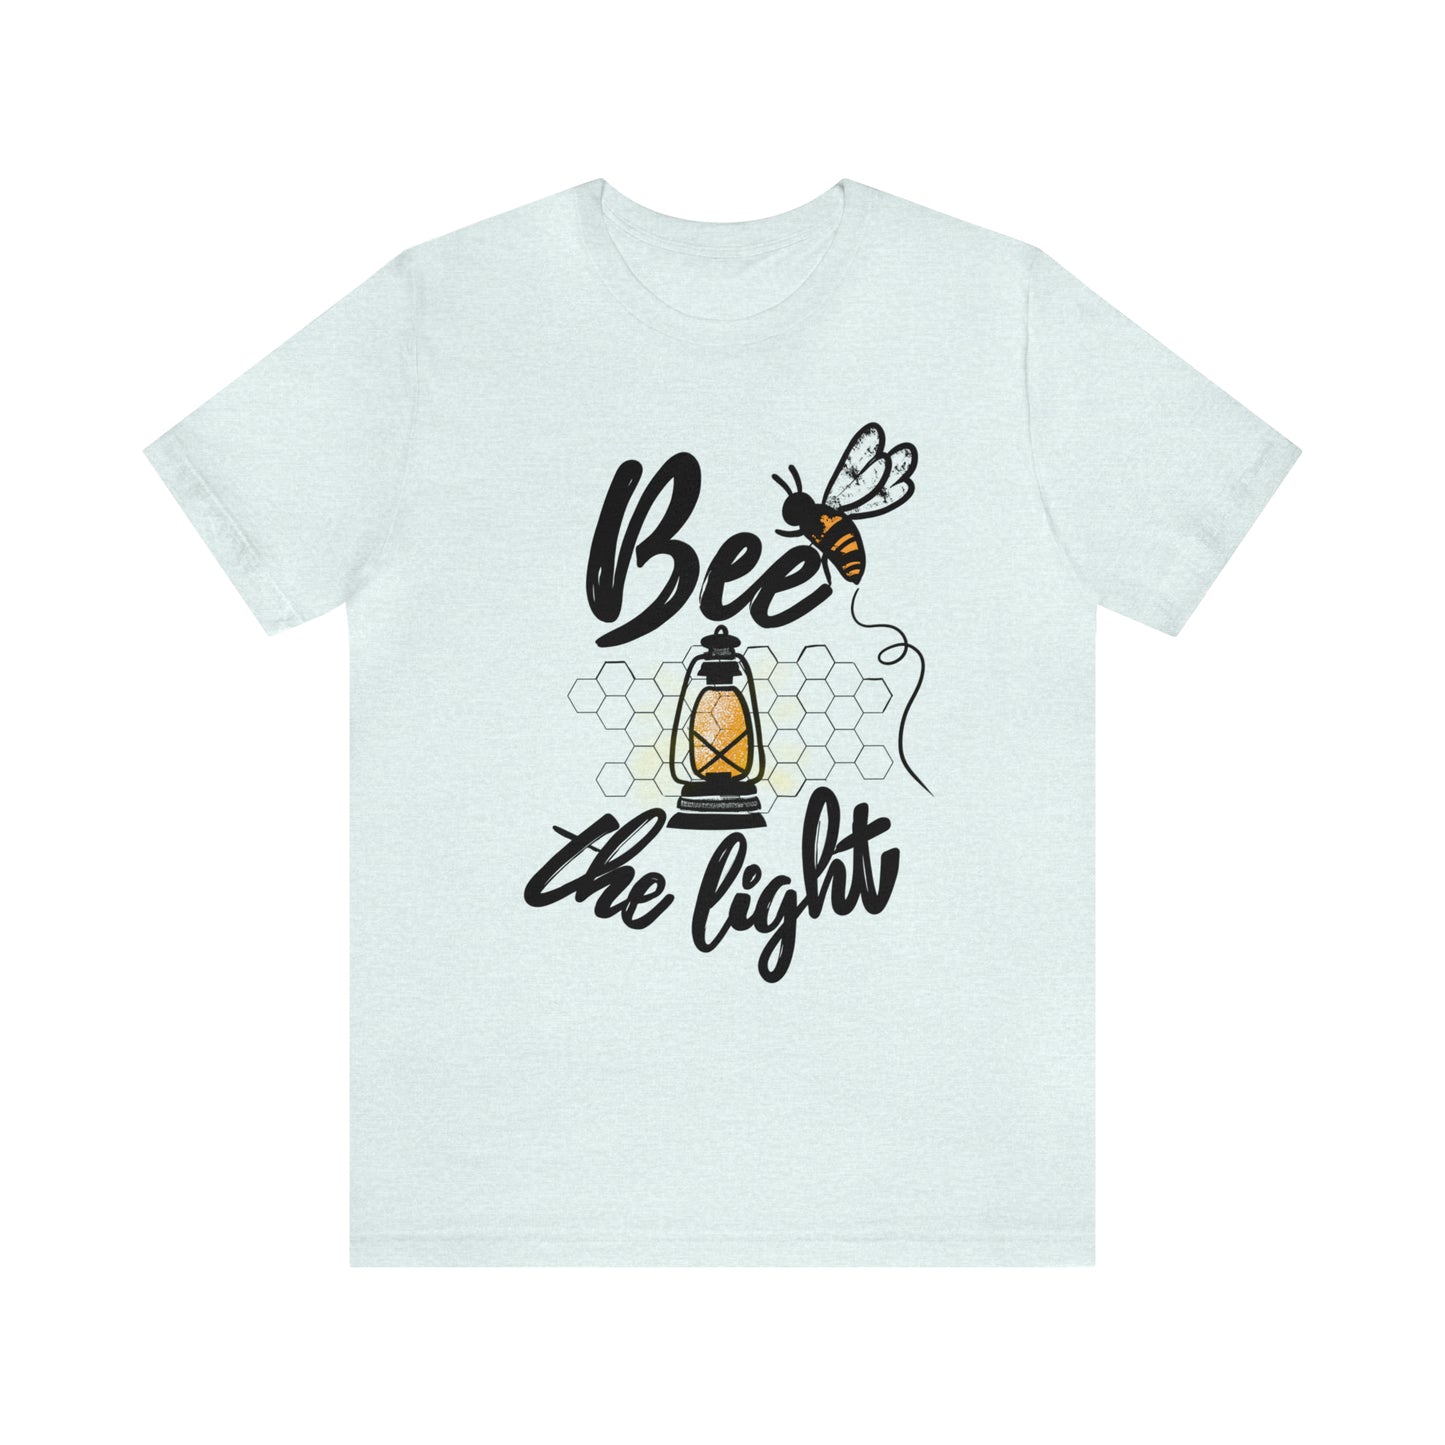 Bee The Light (Green Pastures Apparel)